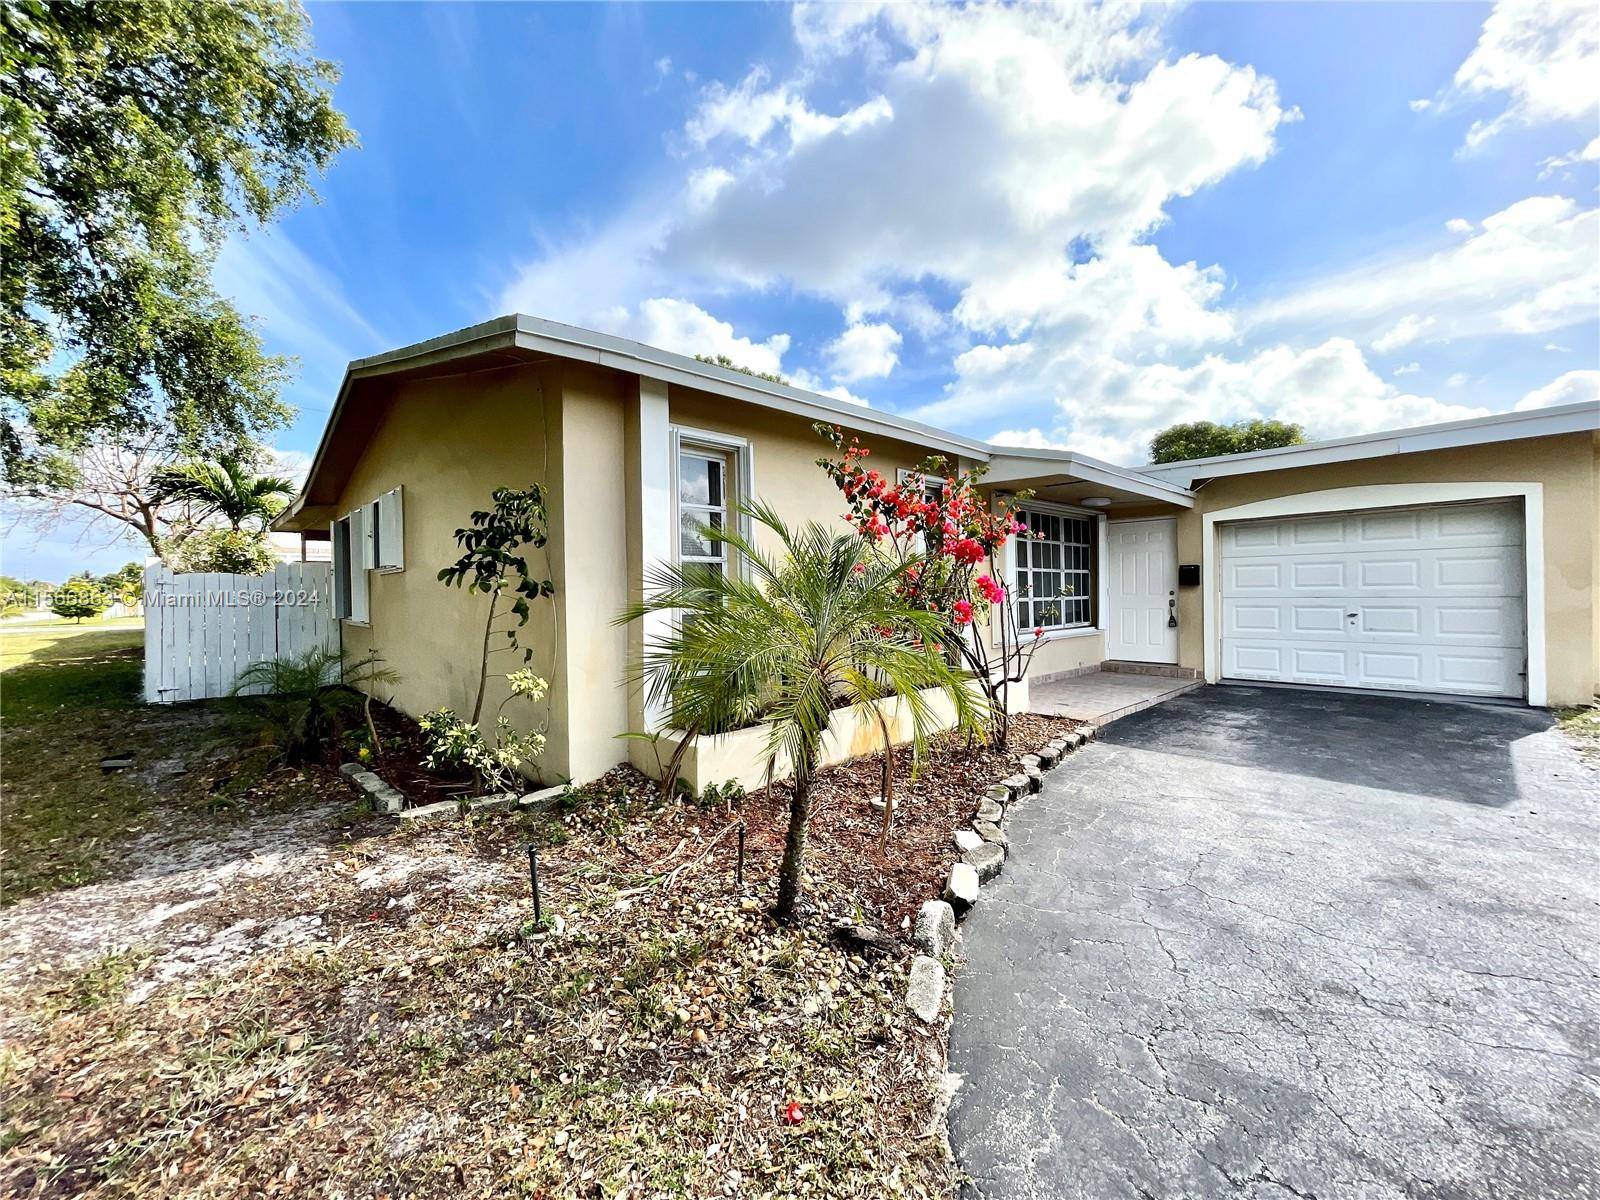 Single Family Home in the Desired Miramar Neighborhood 3 Bedroom 2 Bathroom, Home offering great Layout with a Nice large fenced Patio, with Updated Kitchen and Granite Counter Top, Stainless ...